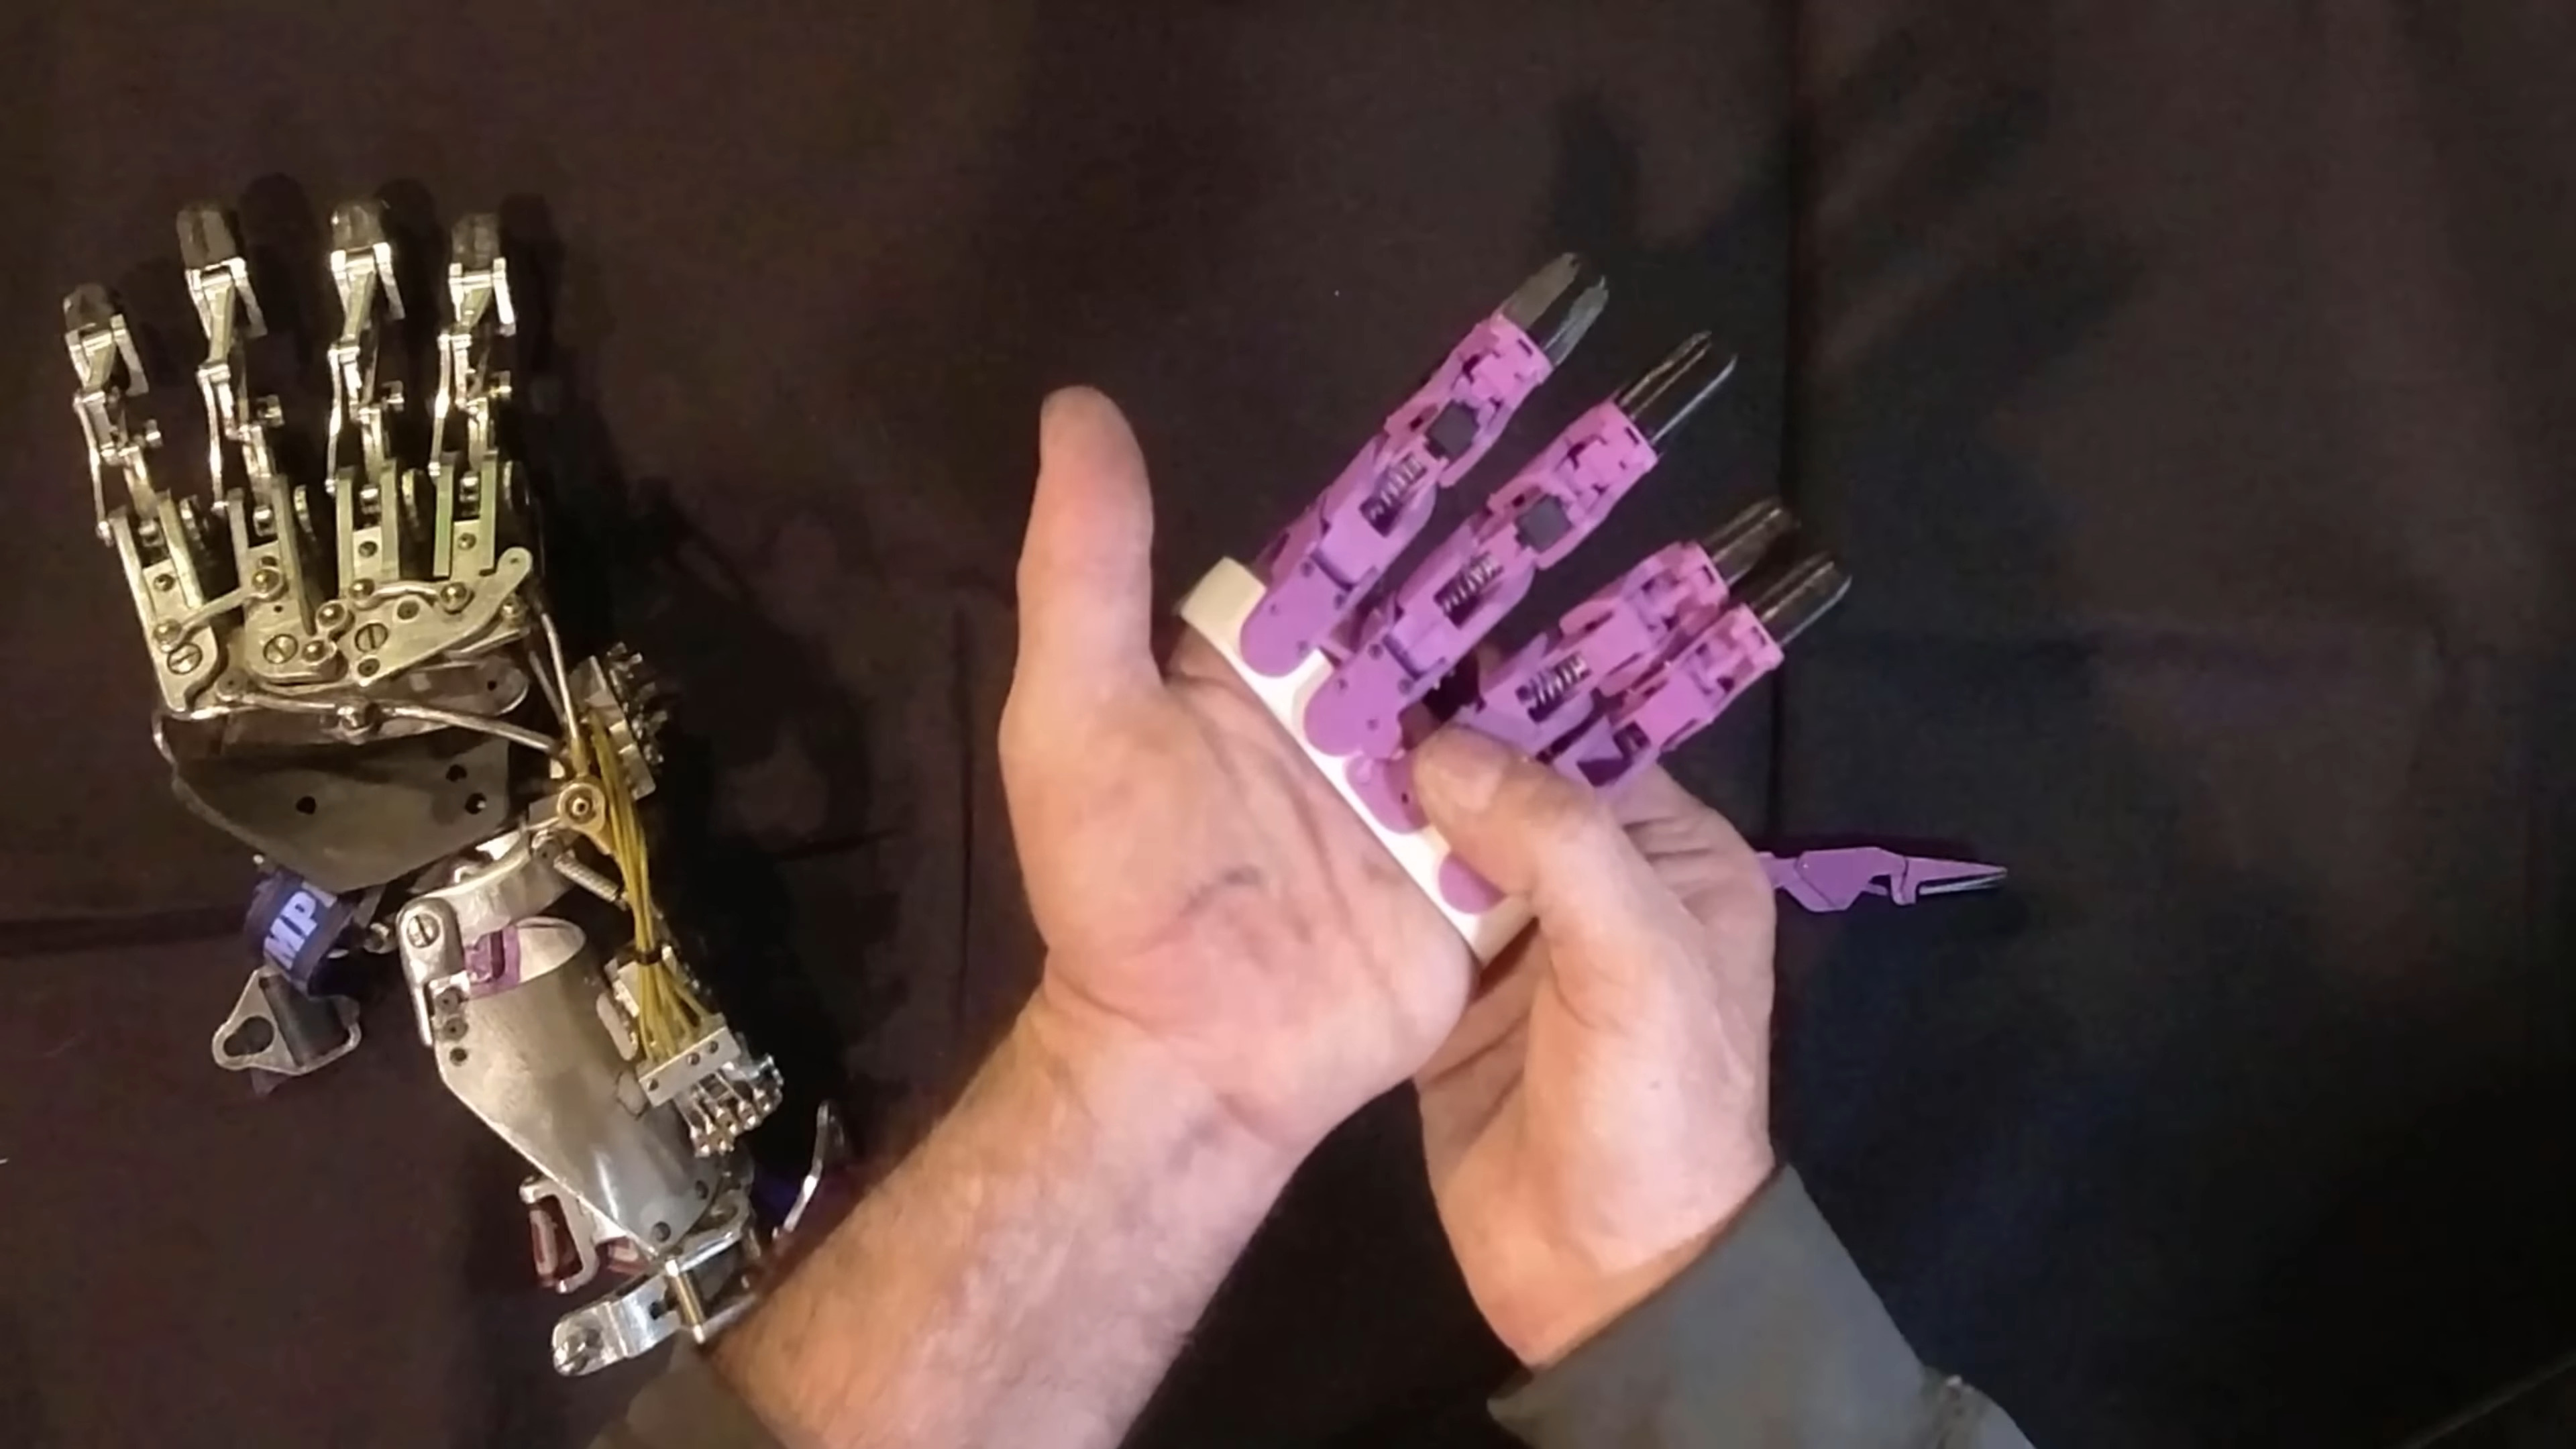 https://hackaday.com/wp-content/uploads/2023/01/New-3D-Printed-Partial-Hand-Prosthetic-Design-Please-Share-to-get-this-out-there-YouTube-3-30.jpeg